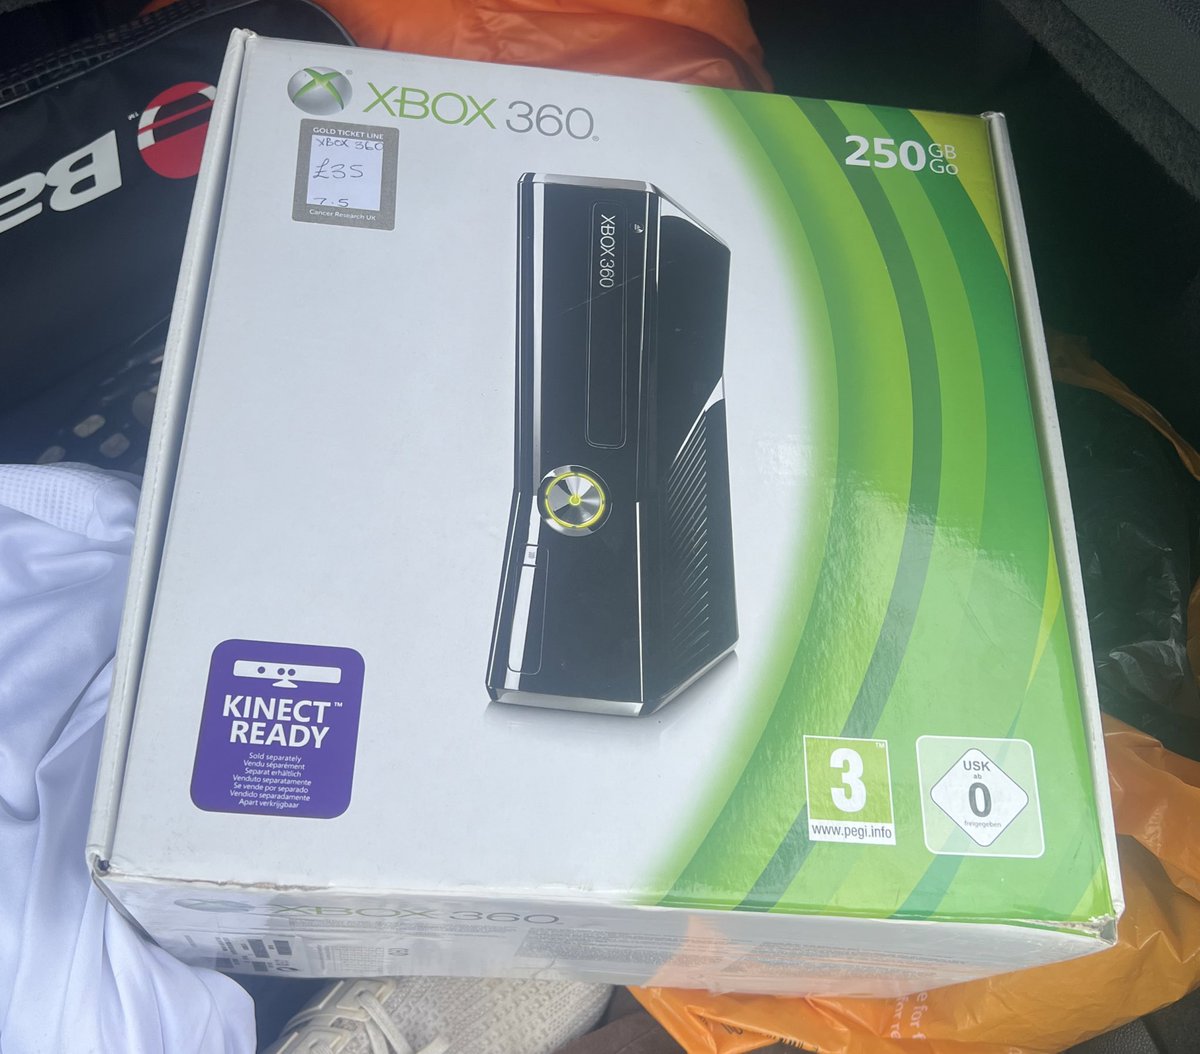 Brand new and sealed Xbox 360 from Charity Shop 😍😍😍 #CharityShopFinds